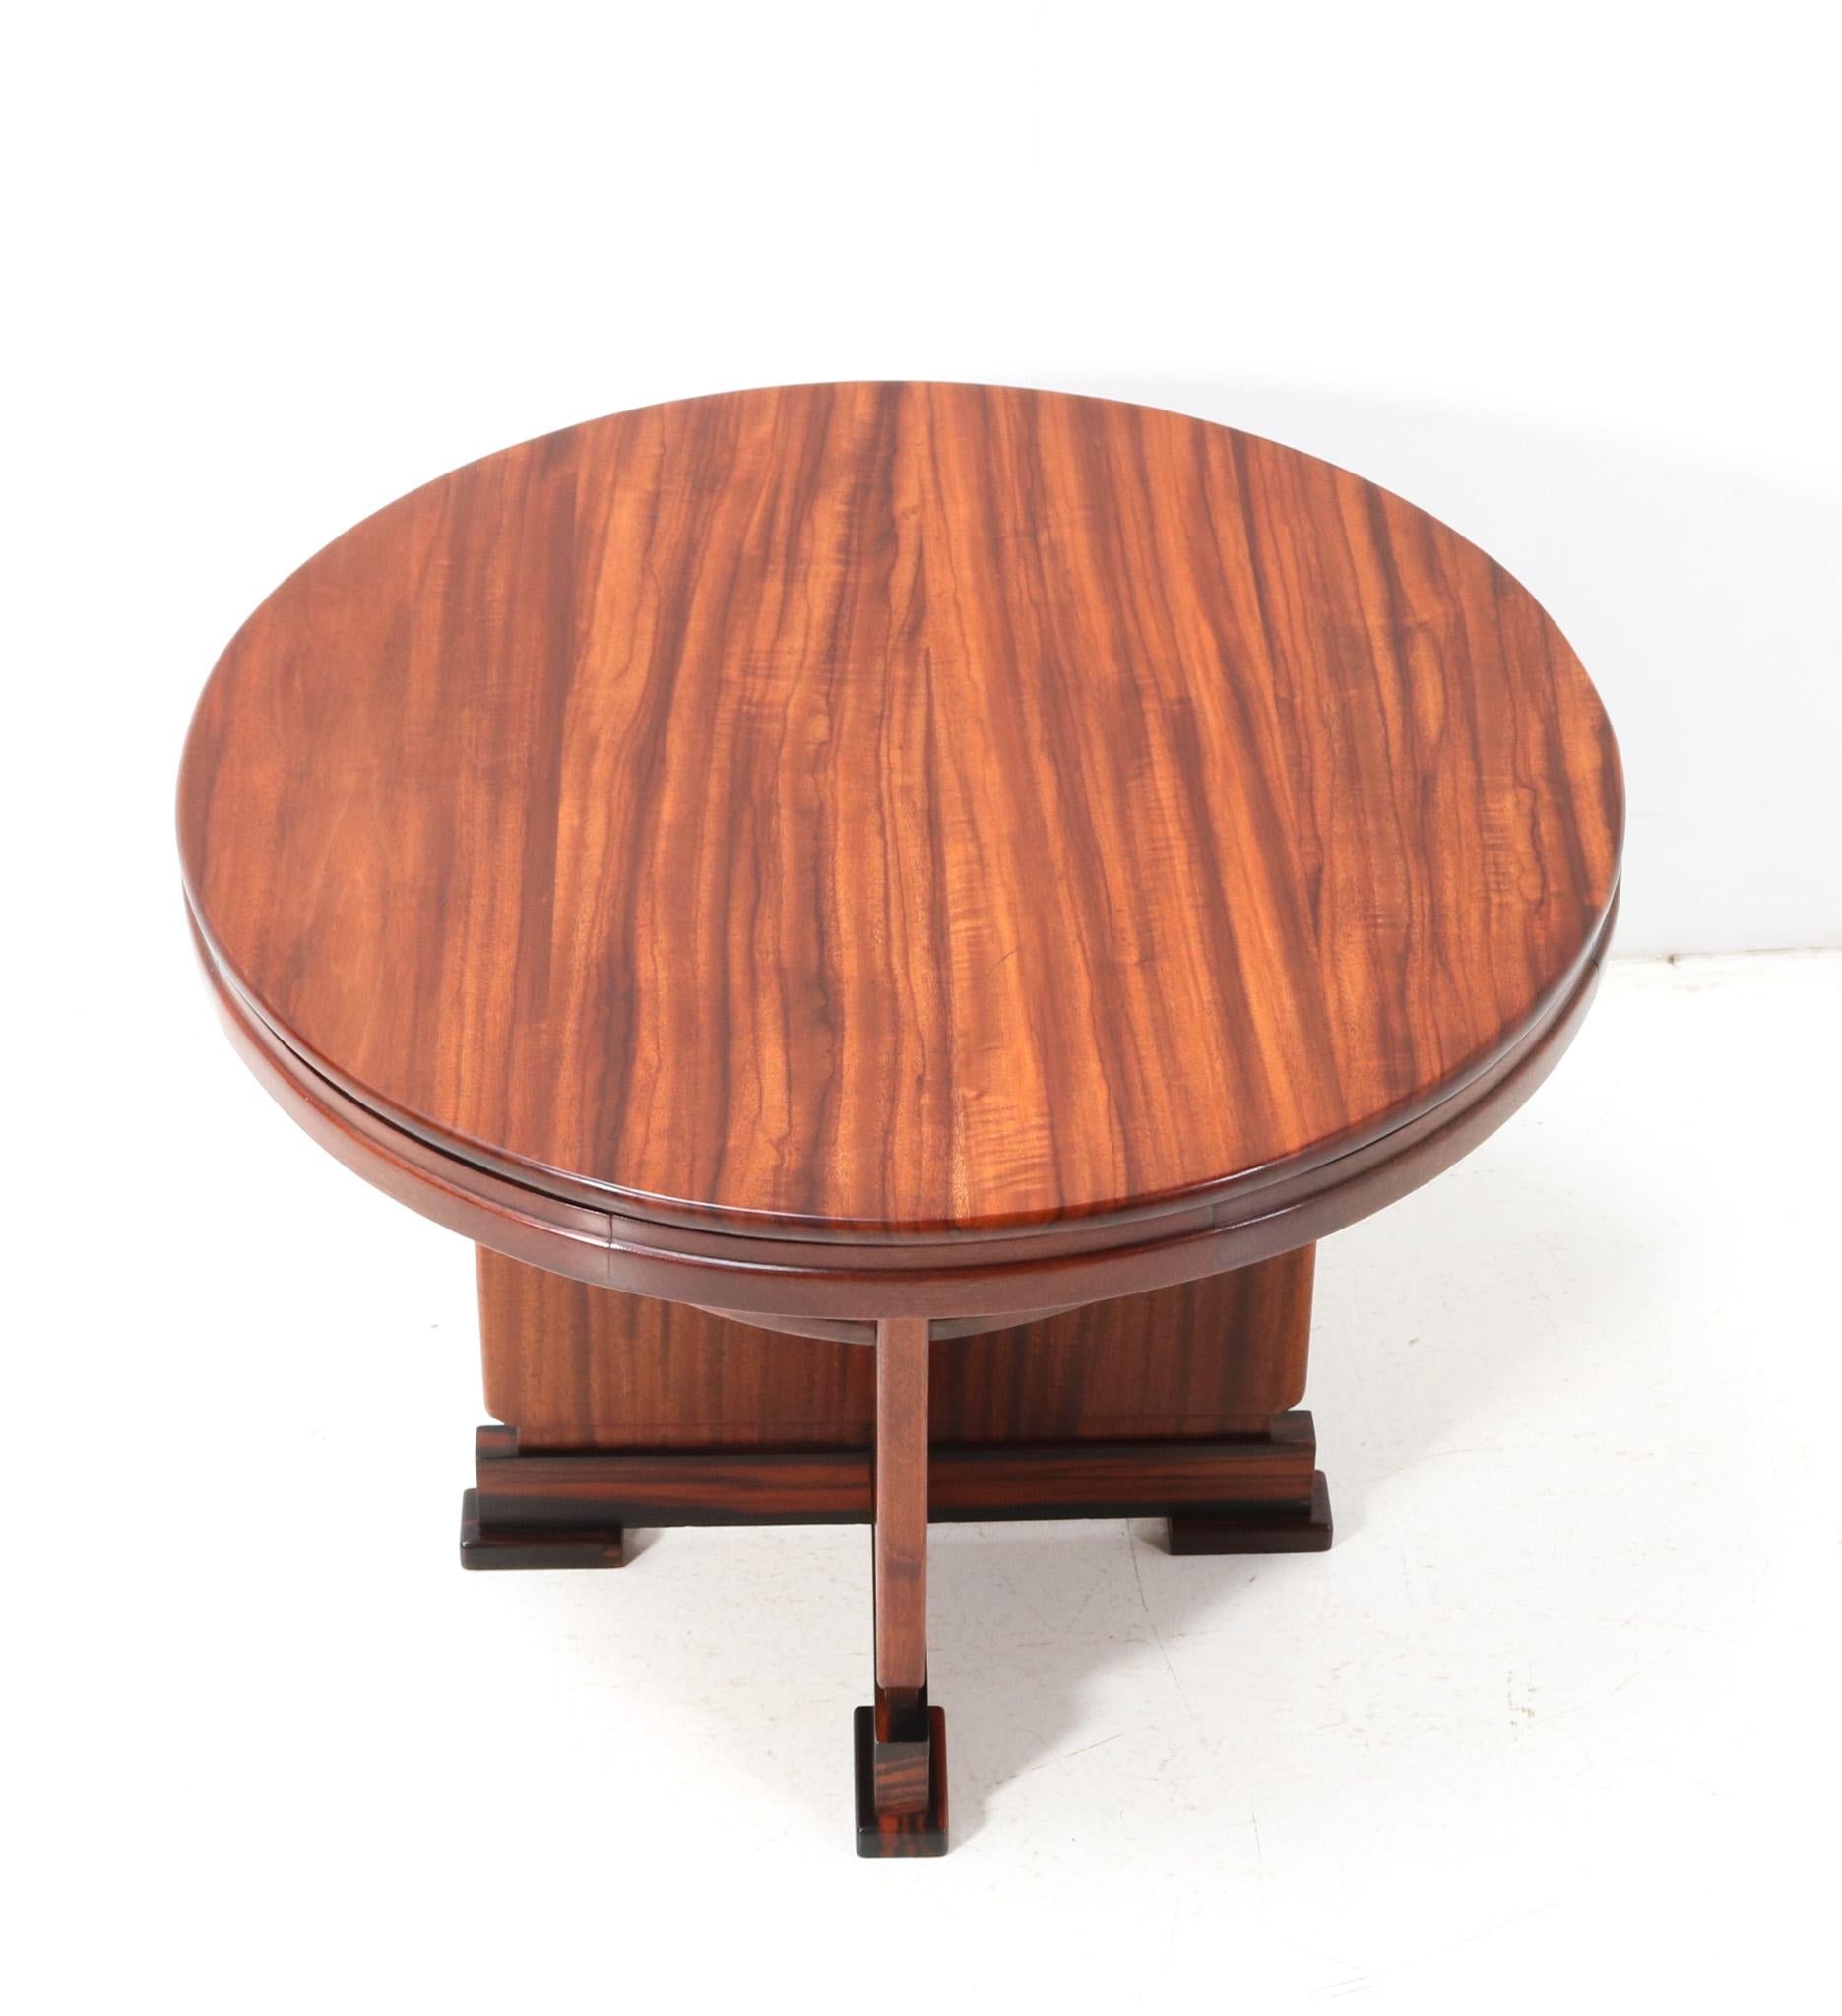 Early 20th Century Padouk Art Deco Amsterdamse School Coffee Table, 1920s For Sale